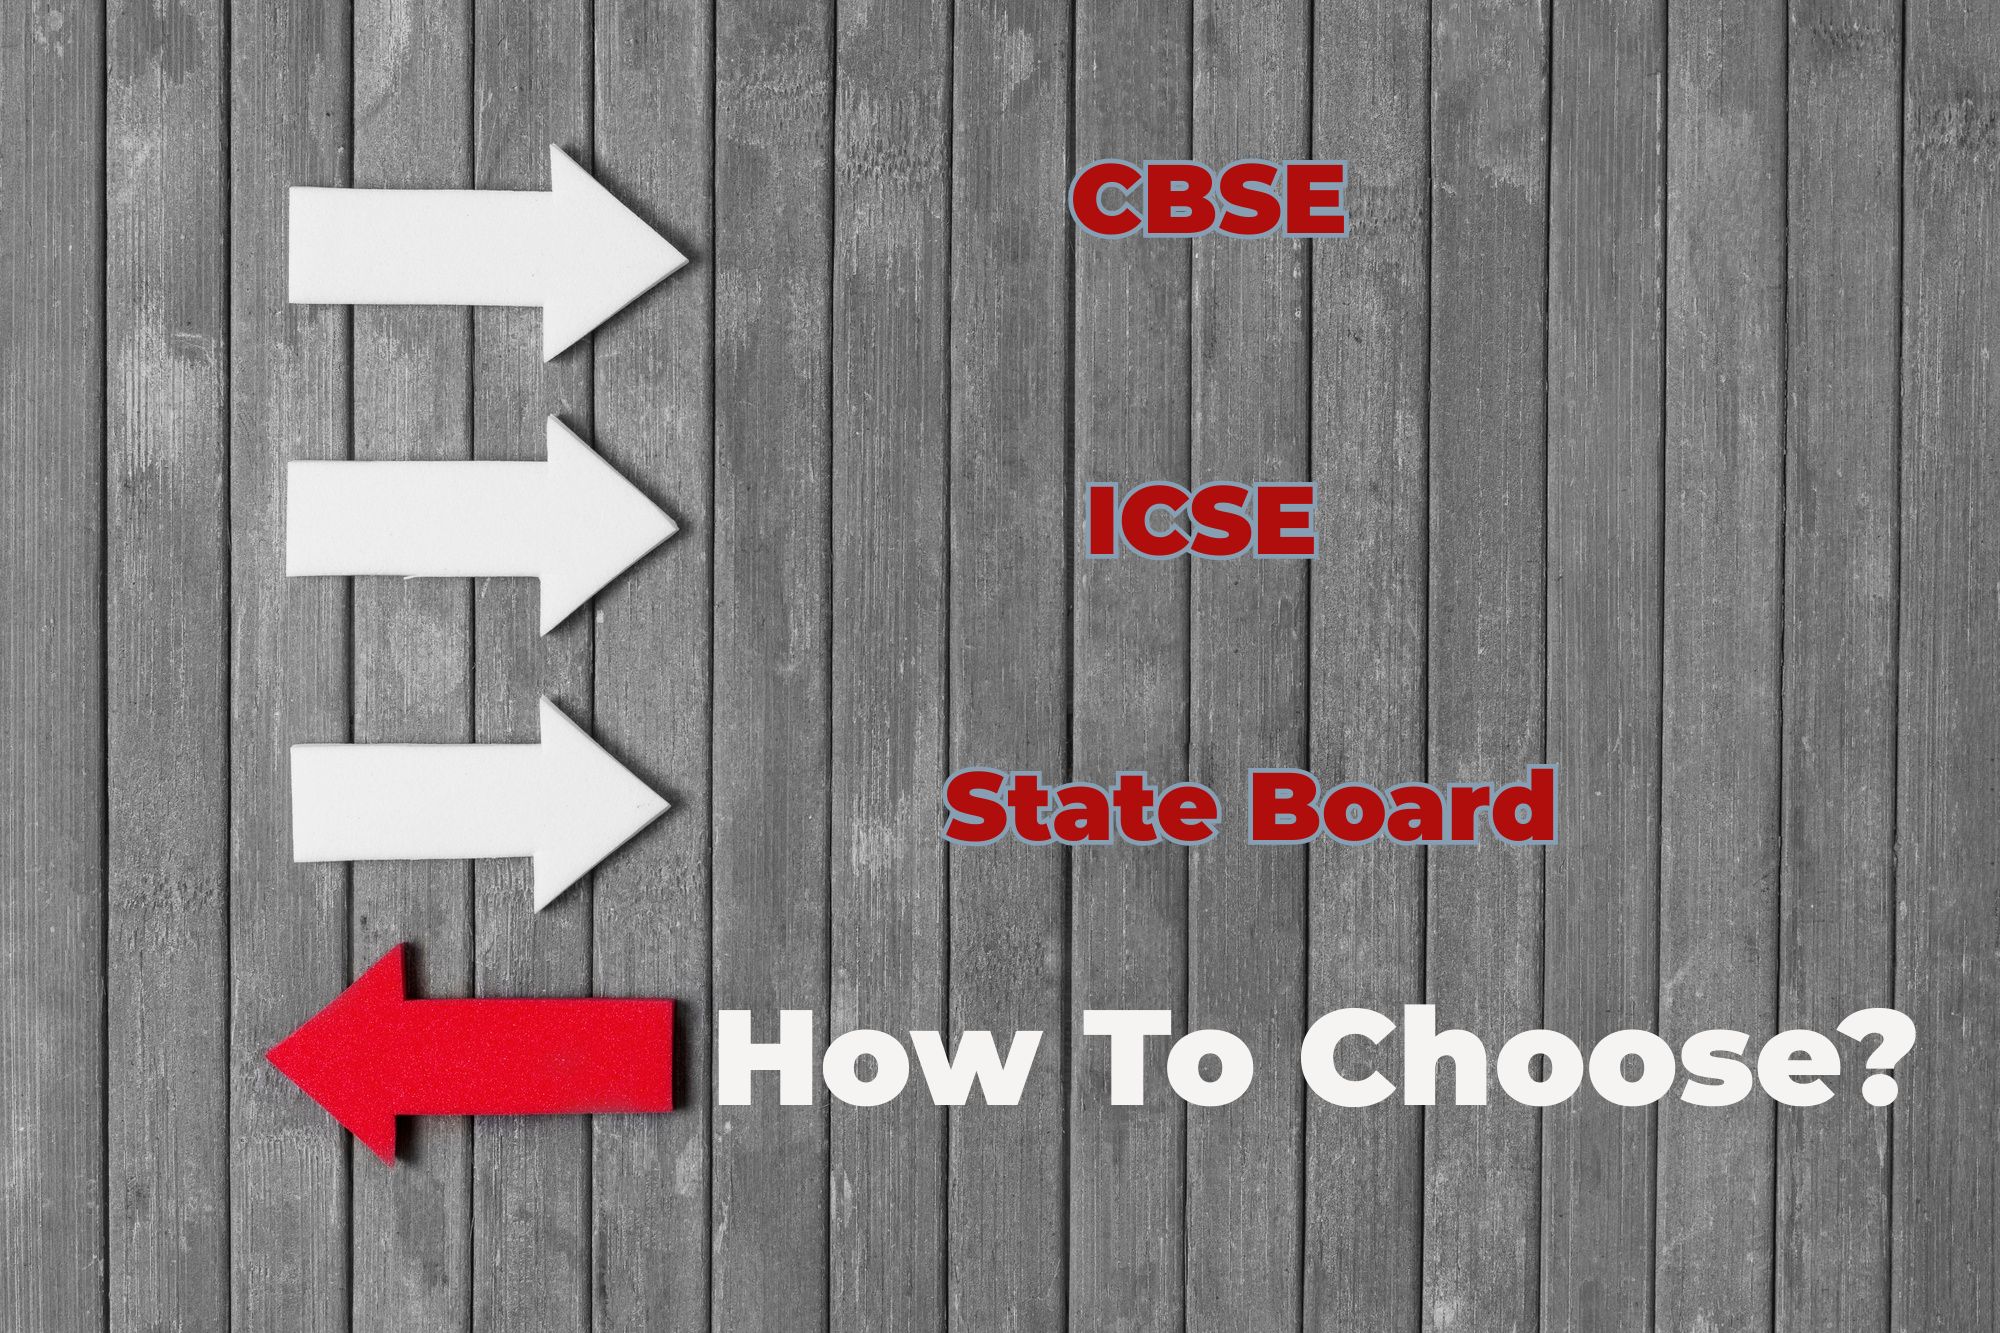 cbse-icse-and-state-board-9-steps-to-choose-the-best-education-board